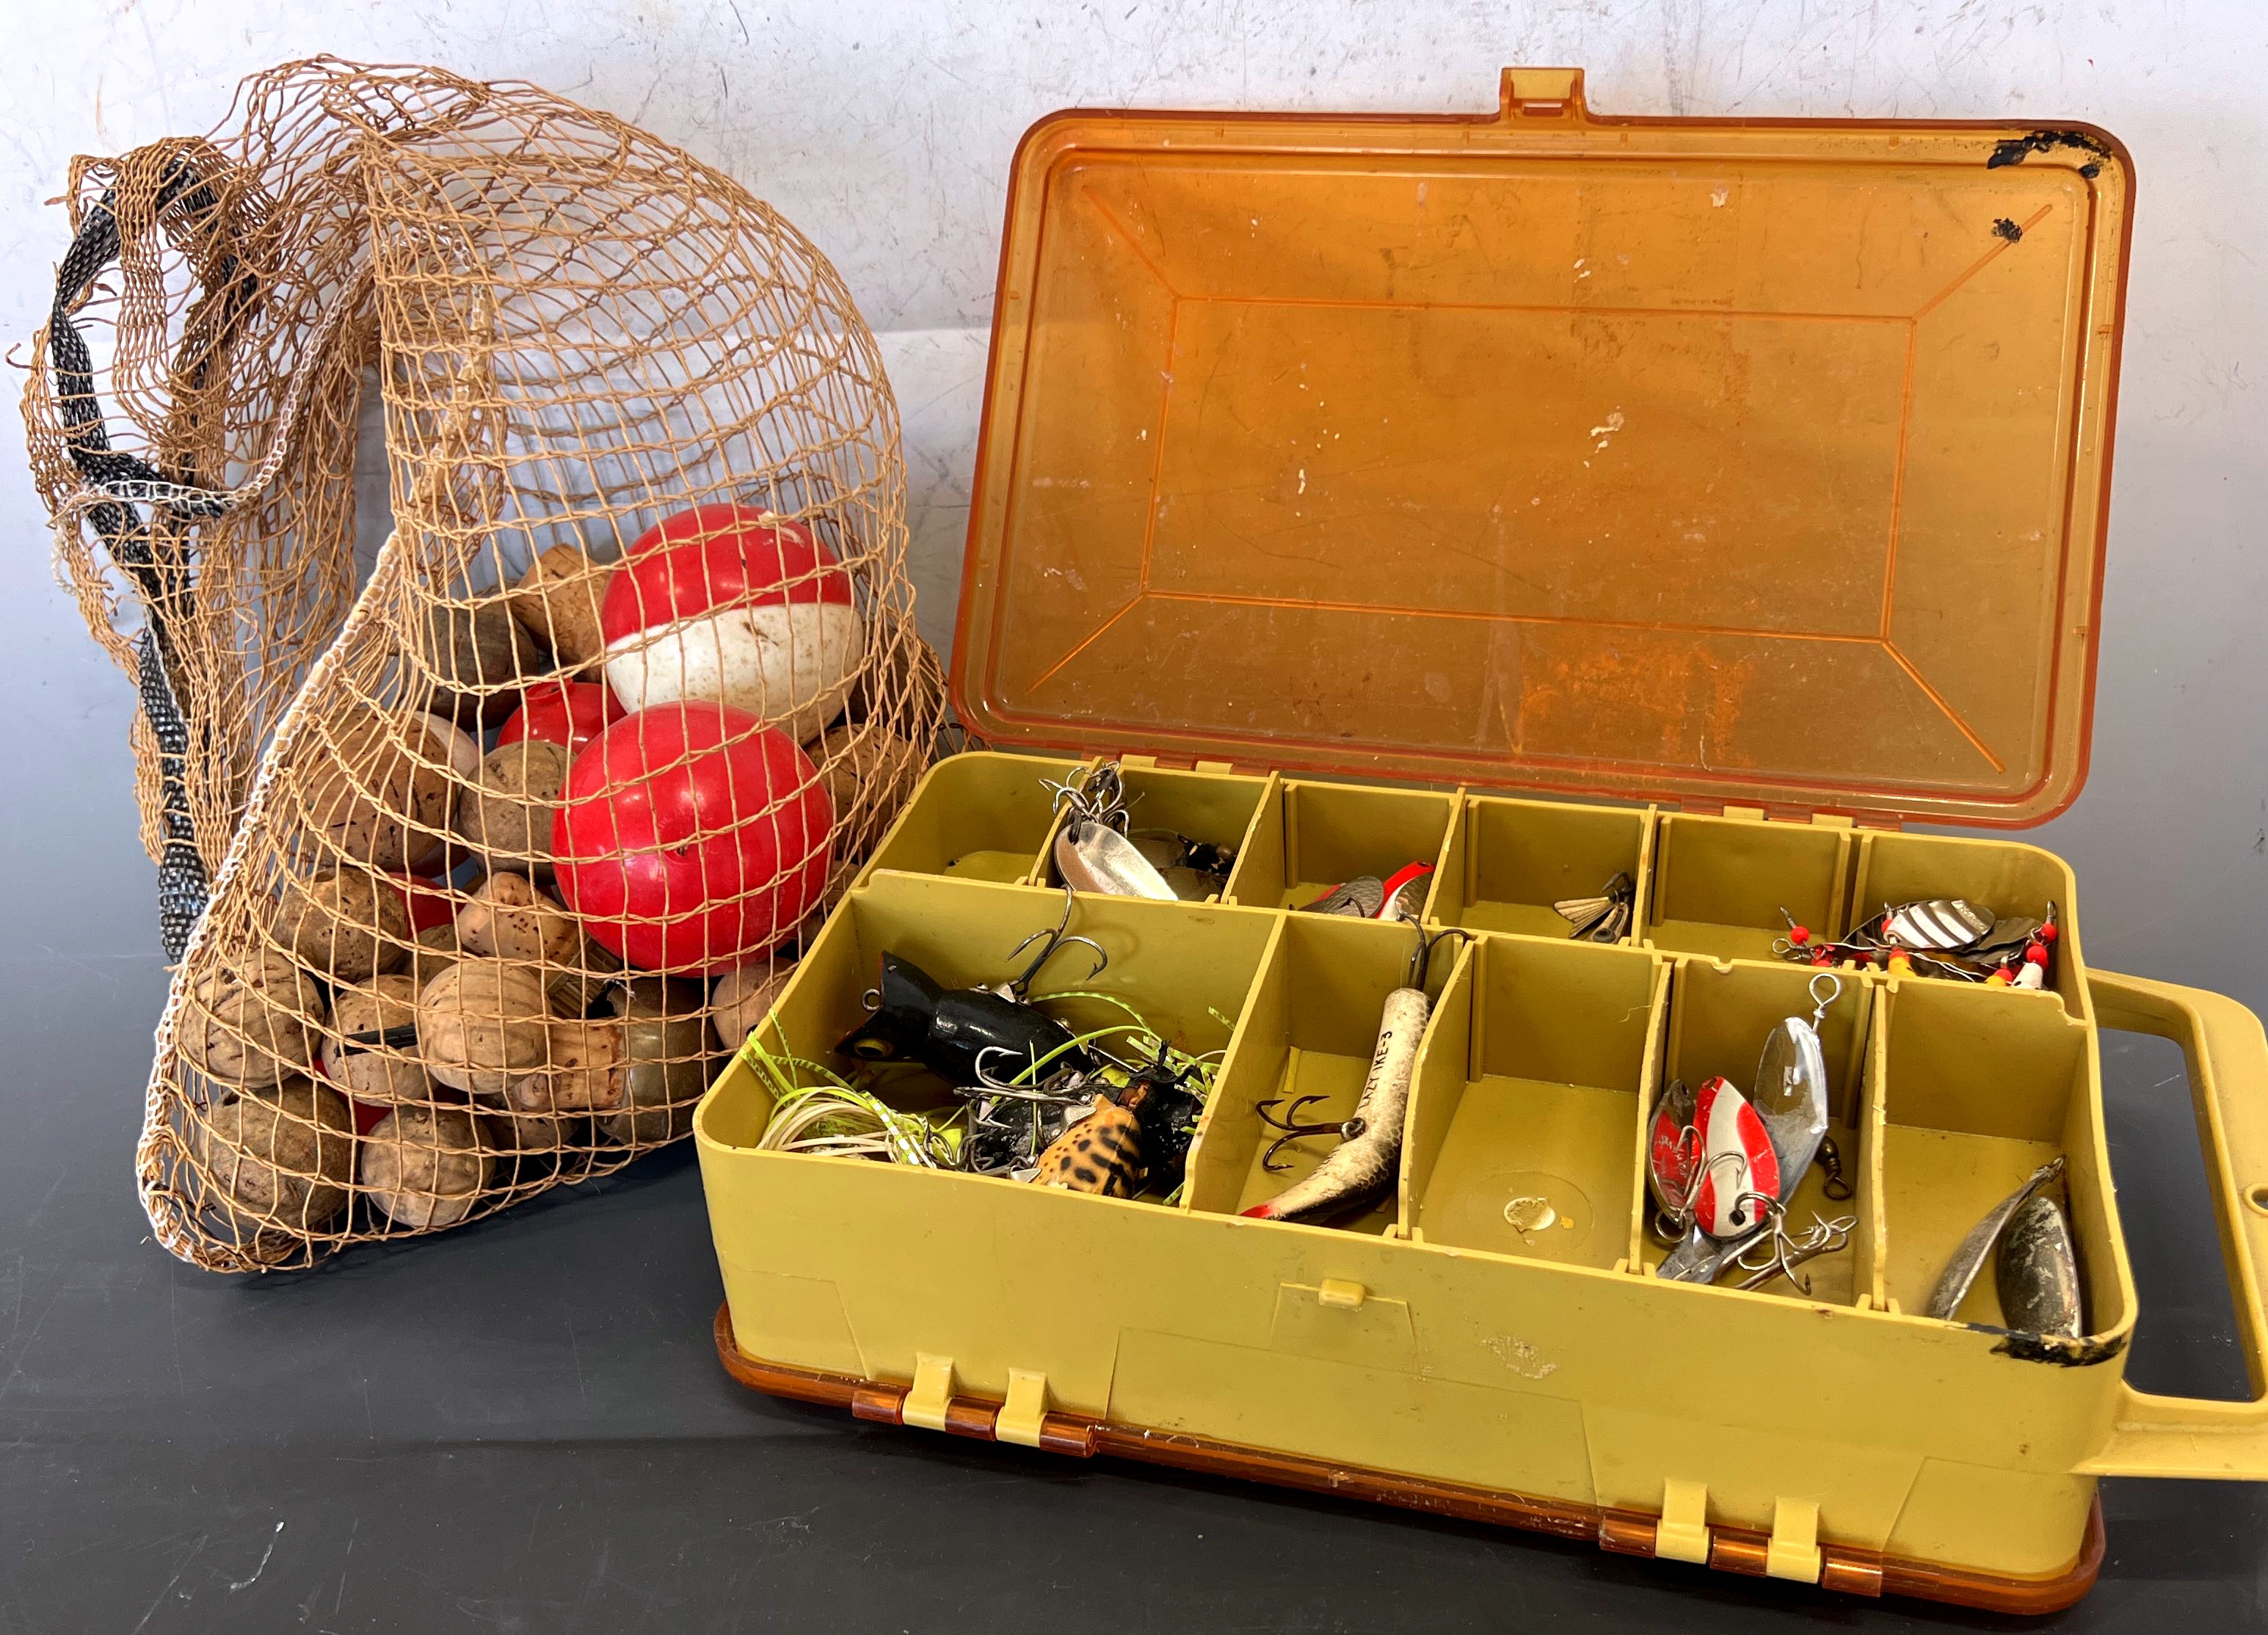 Sold at Auction: VINTAGE TACKLE BOX FULL OF LURES, REEL & SUPPLIES